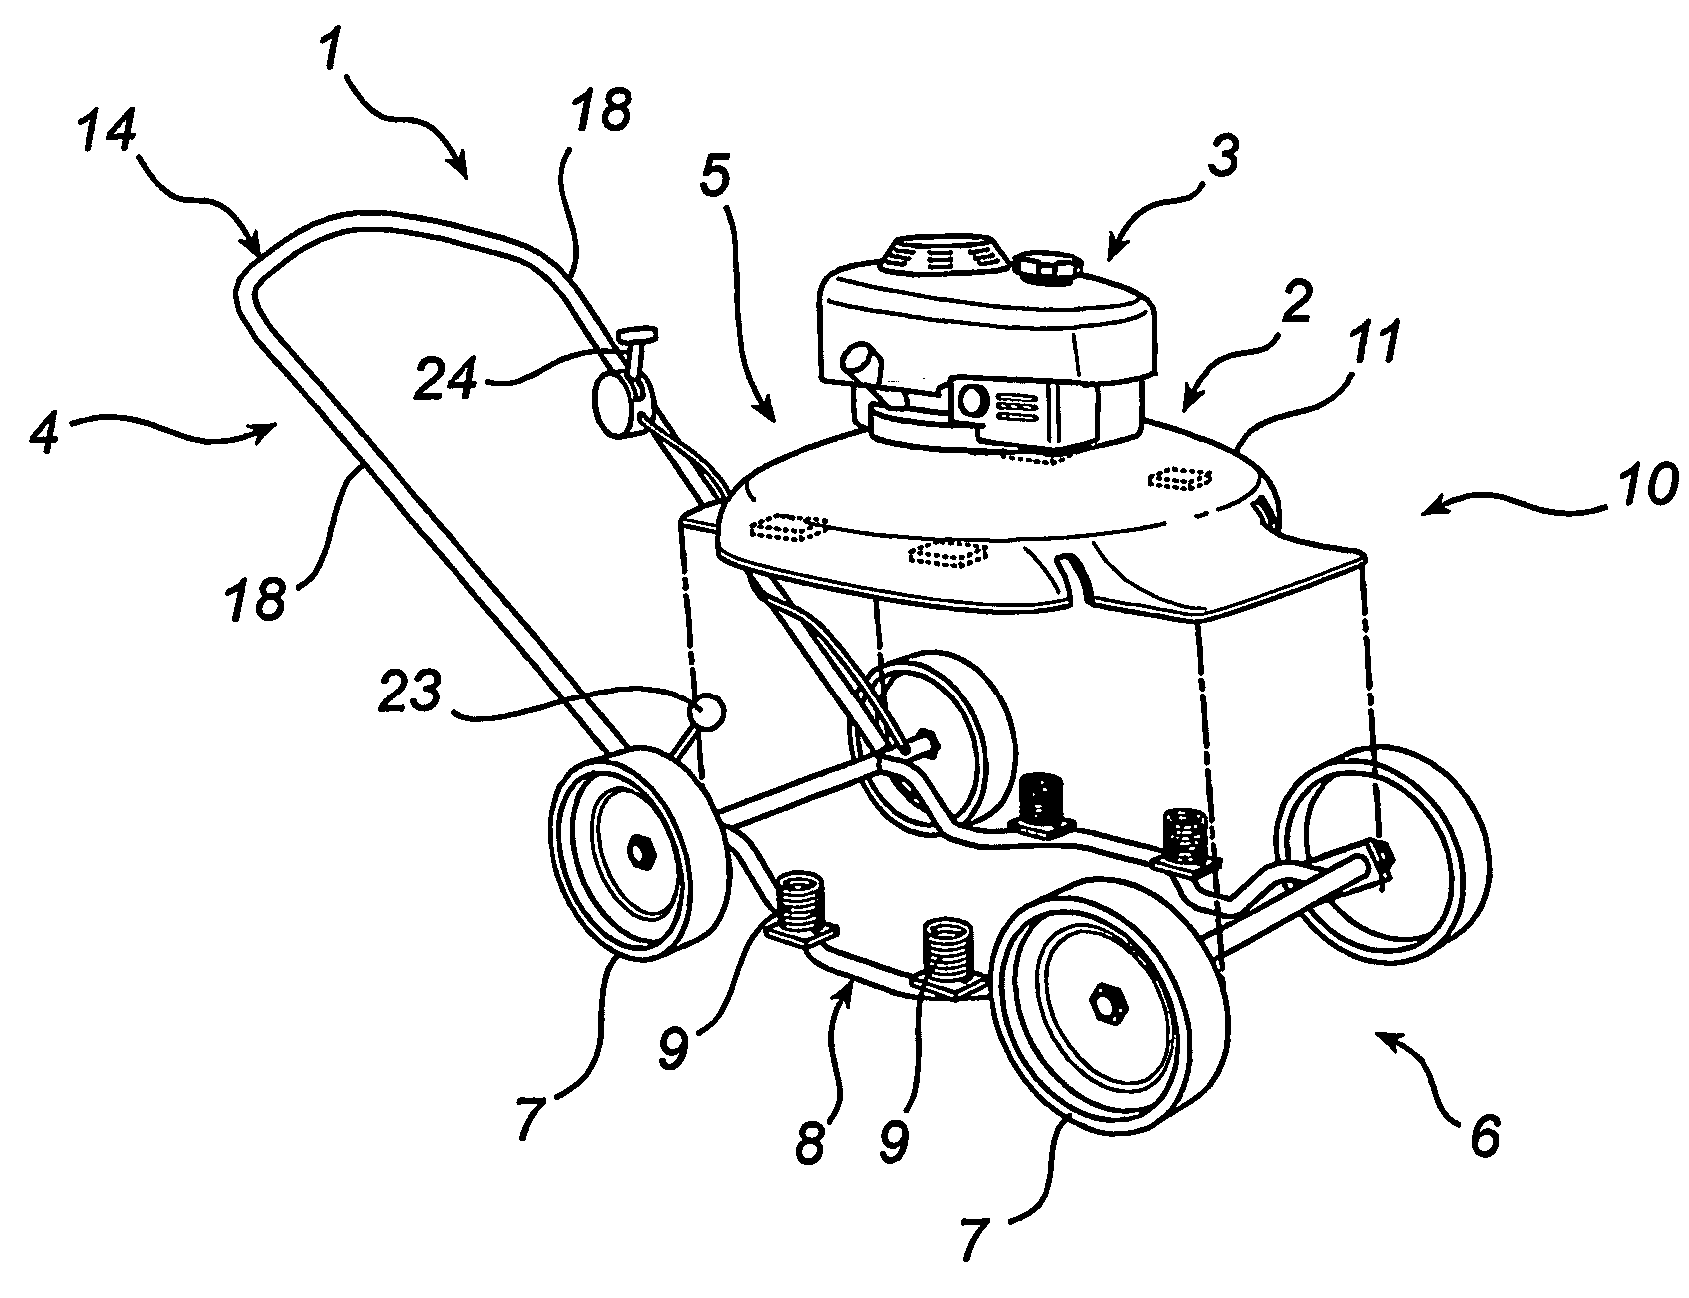 Lawnmower with vibration reduction